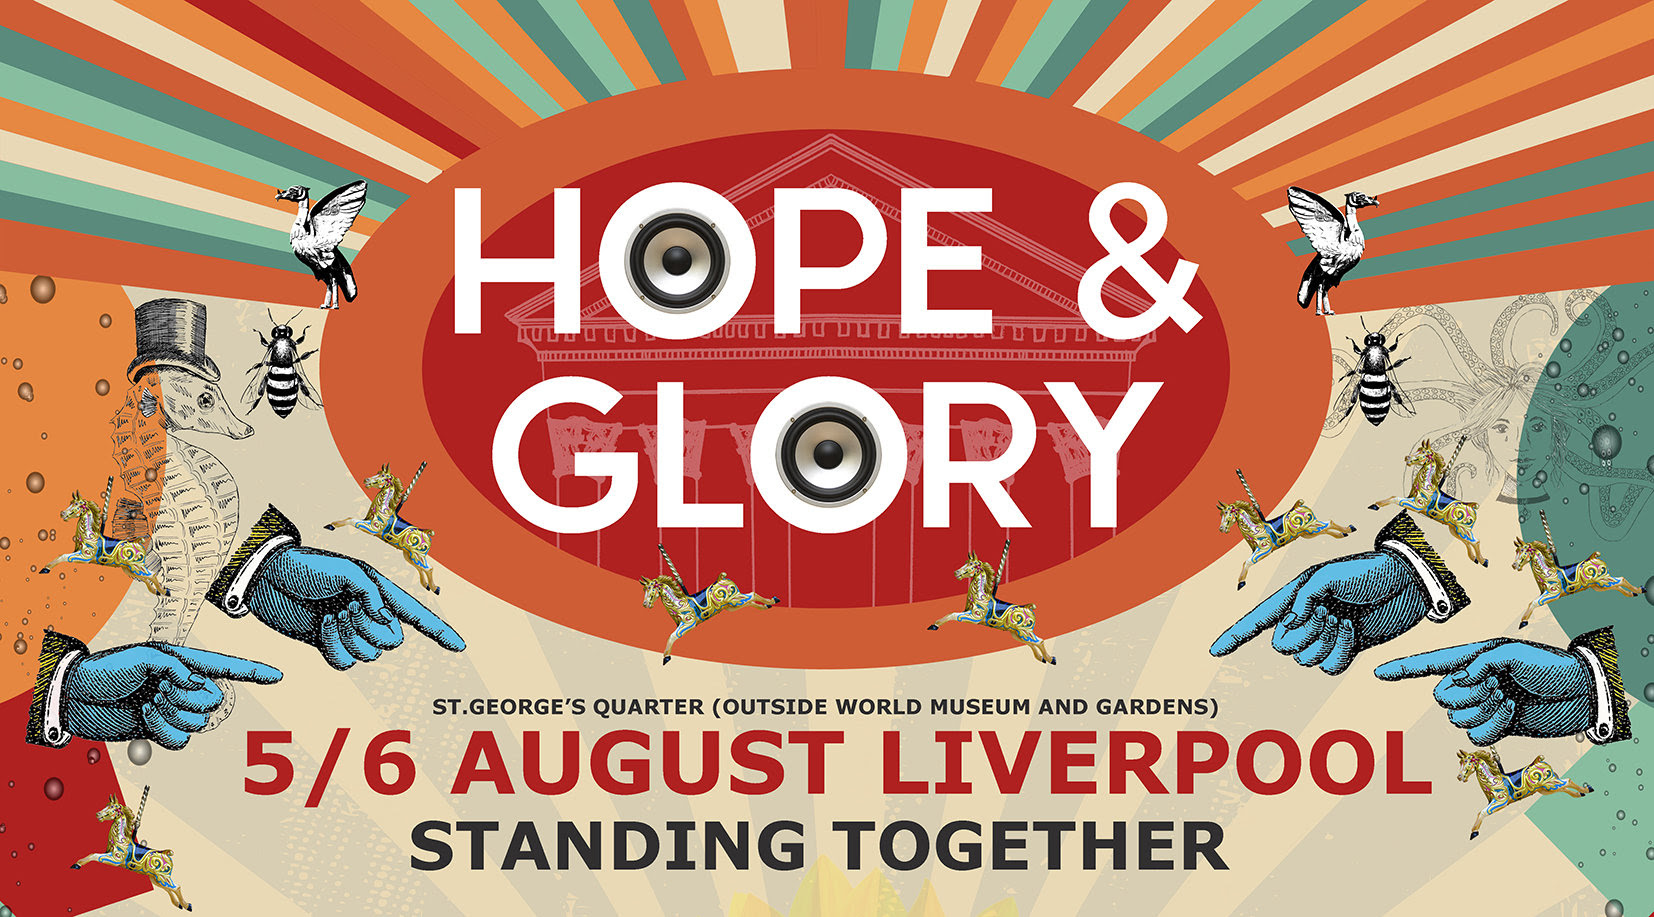 HOPE & GLORY Festival donates all profits to victims of Manchester terror attack